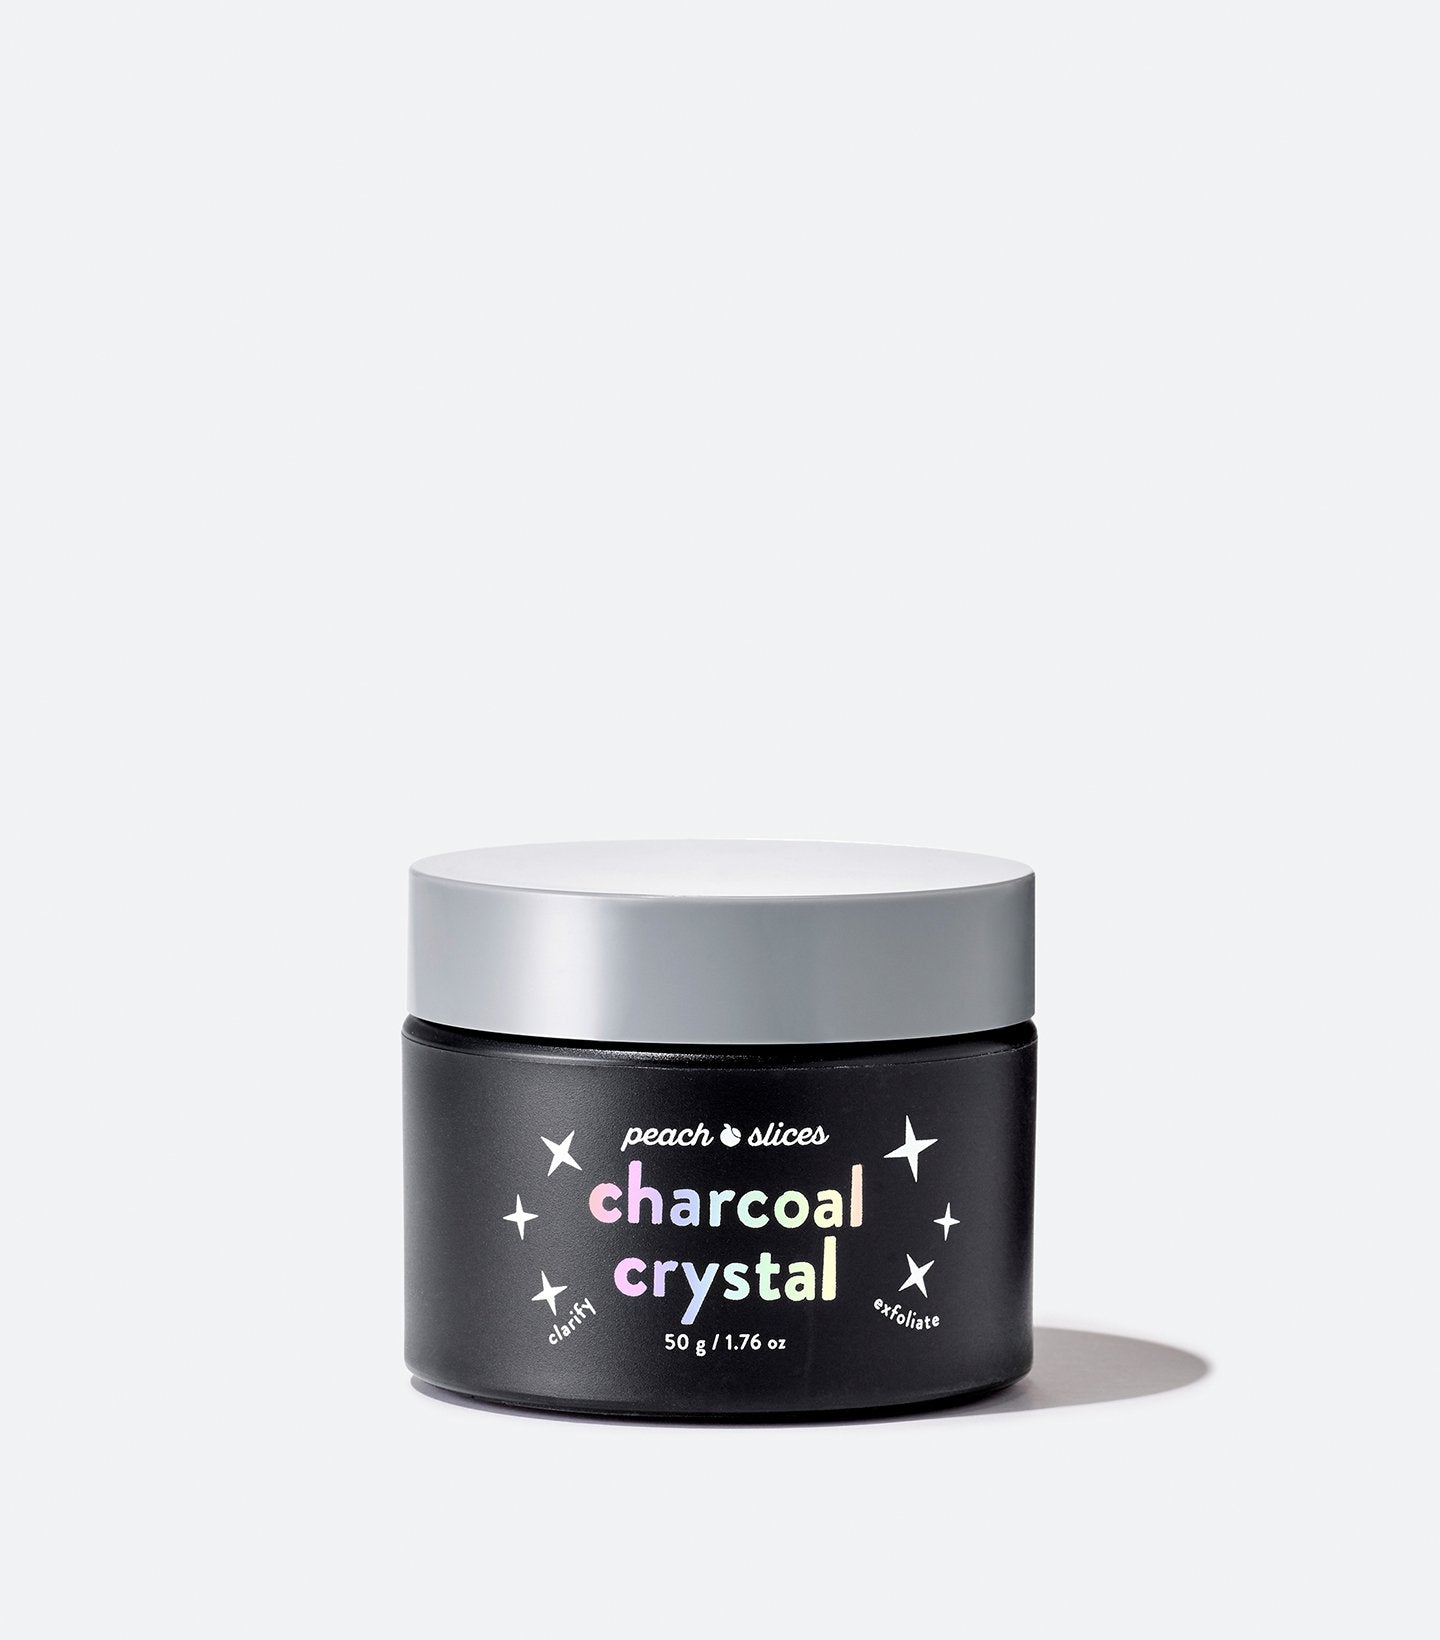 Charcoal Crystal Clarifying Shimmer Peel-Off Mask